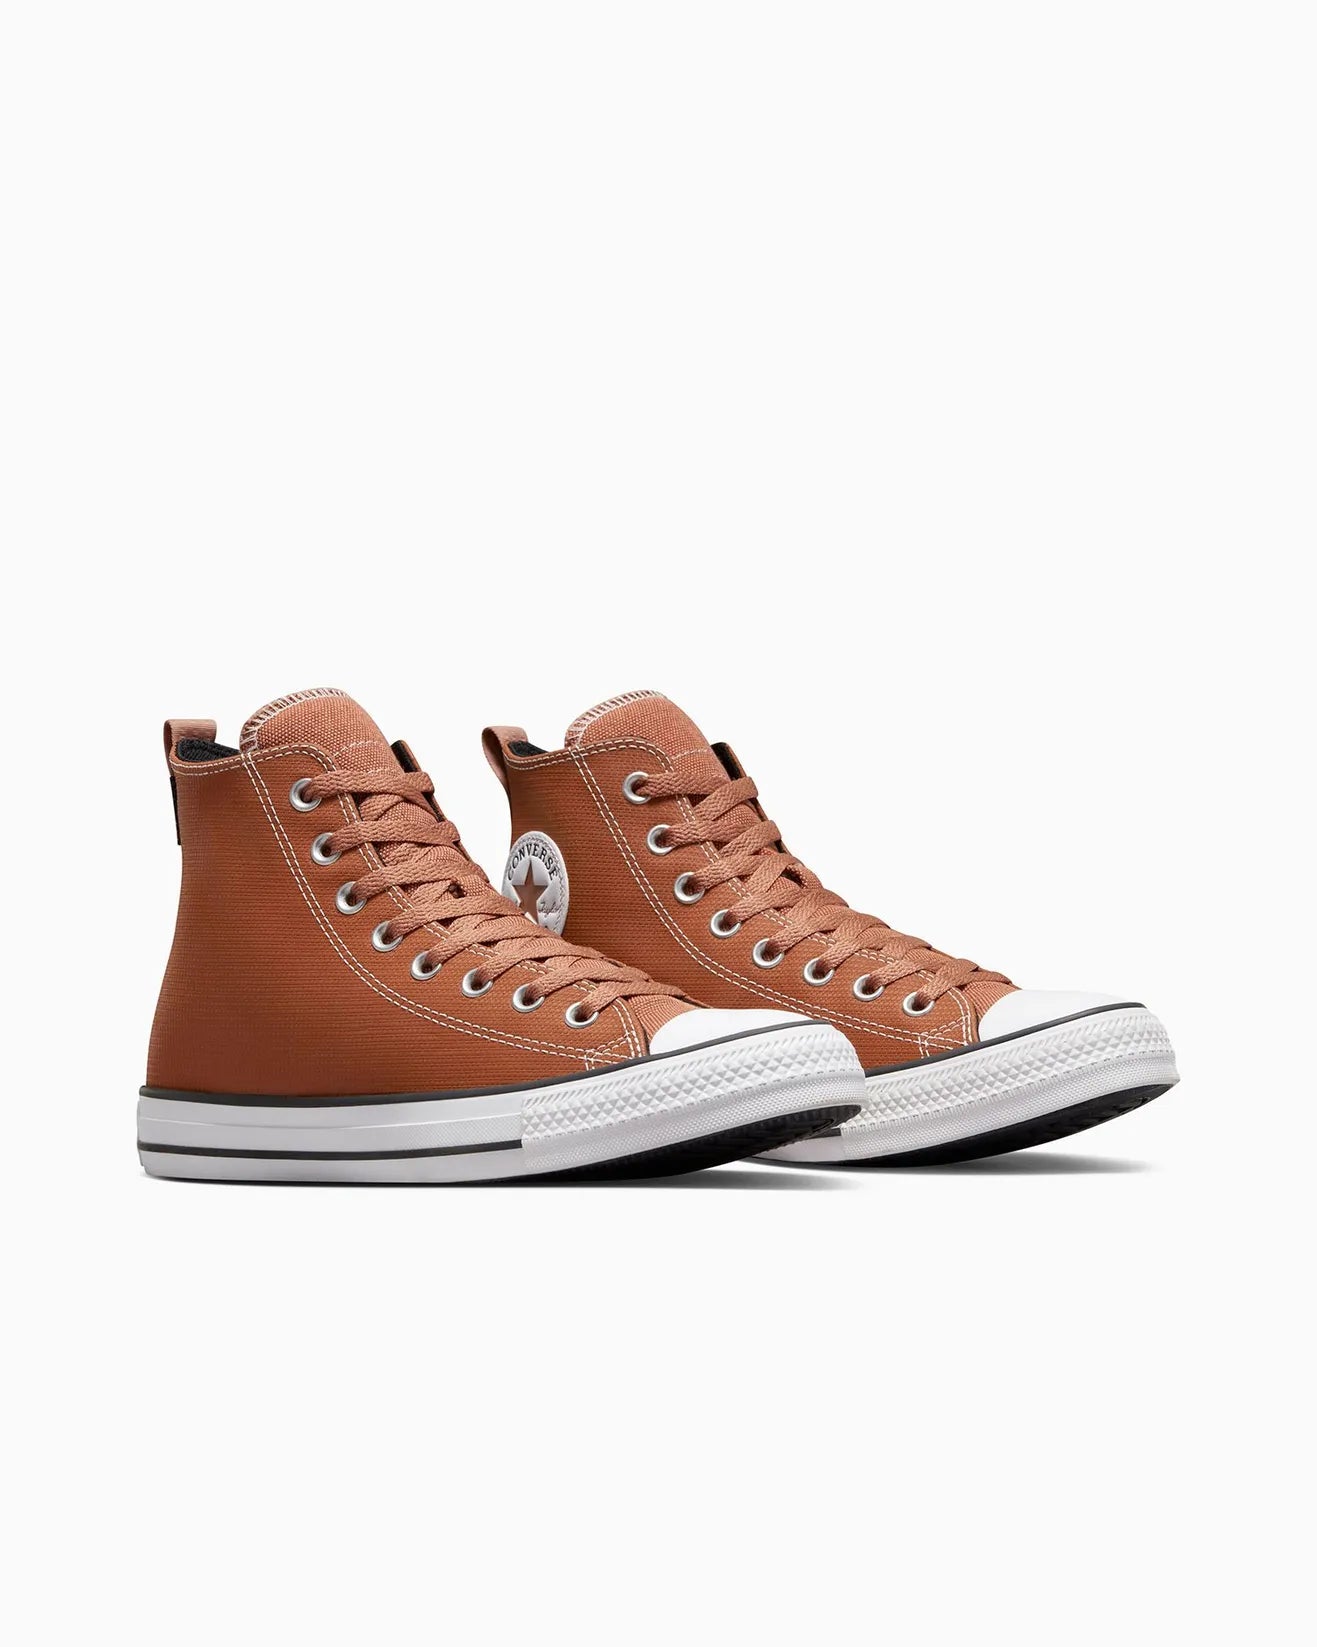 CONVERSE Chuck Taylor All Star Counter Climate Hi Shoe - Tawny Owl/Clay Pot/White